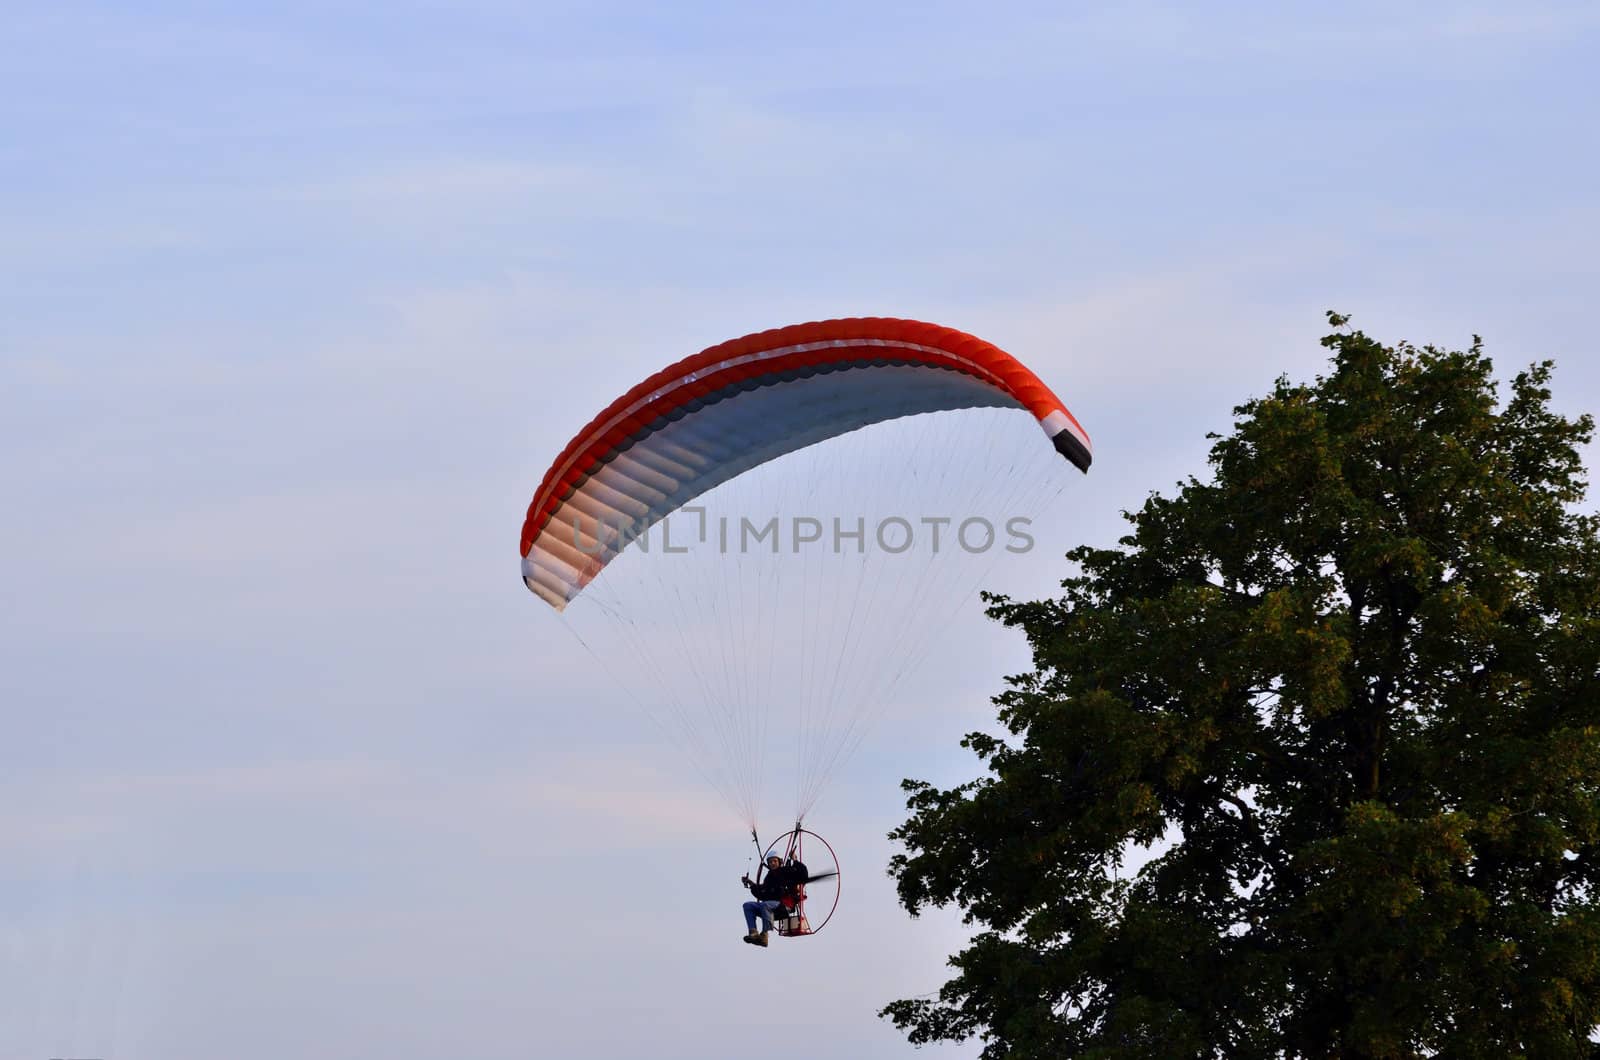 Photo shows a paraglider flies on a background of blue sky.